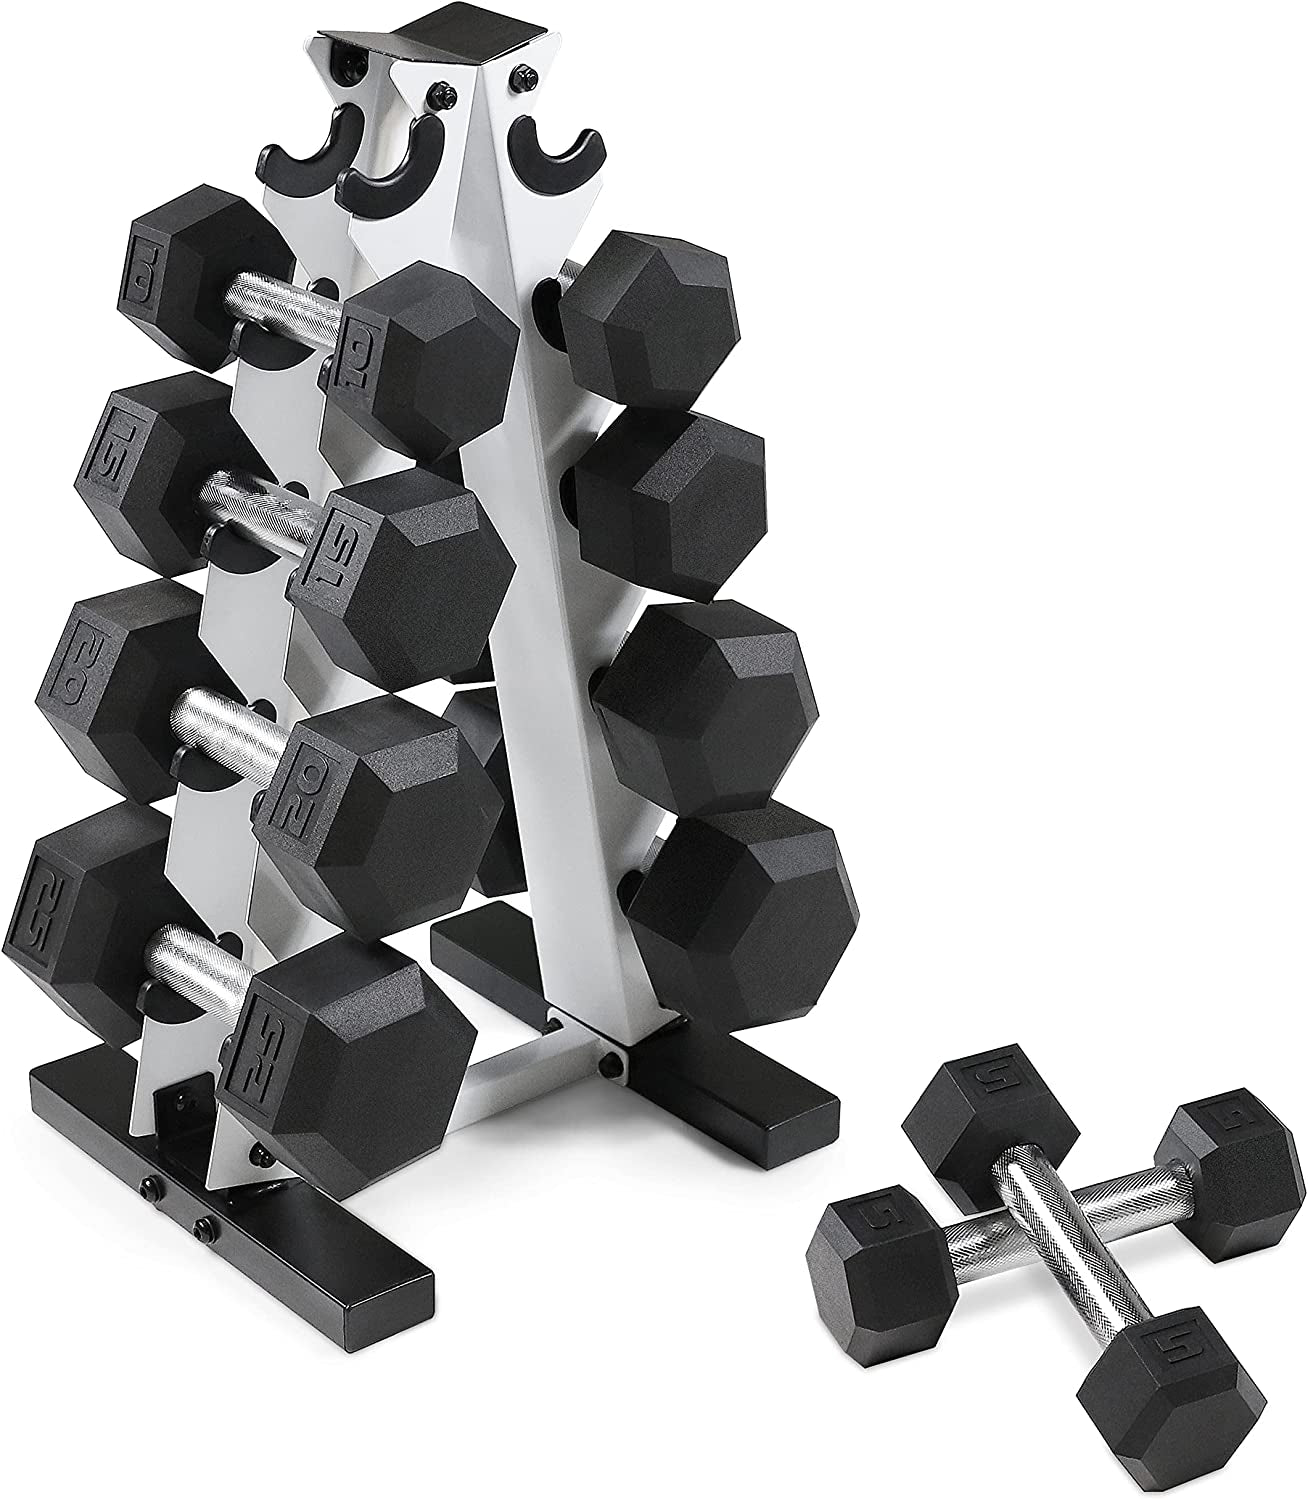 5-25Lb Rubber Coated Hex Dumbbell Set with a Frame Storage Rack Non-Slip Hex Shape for Muscle Toning, Strength Building & Weight Loss - Multiple Choices Available